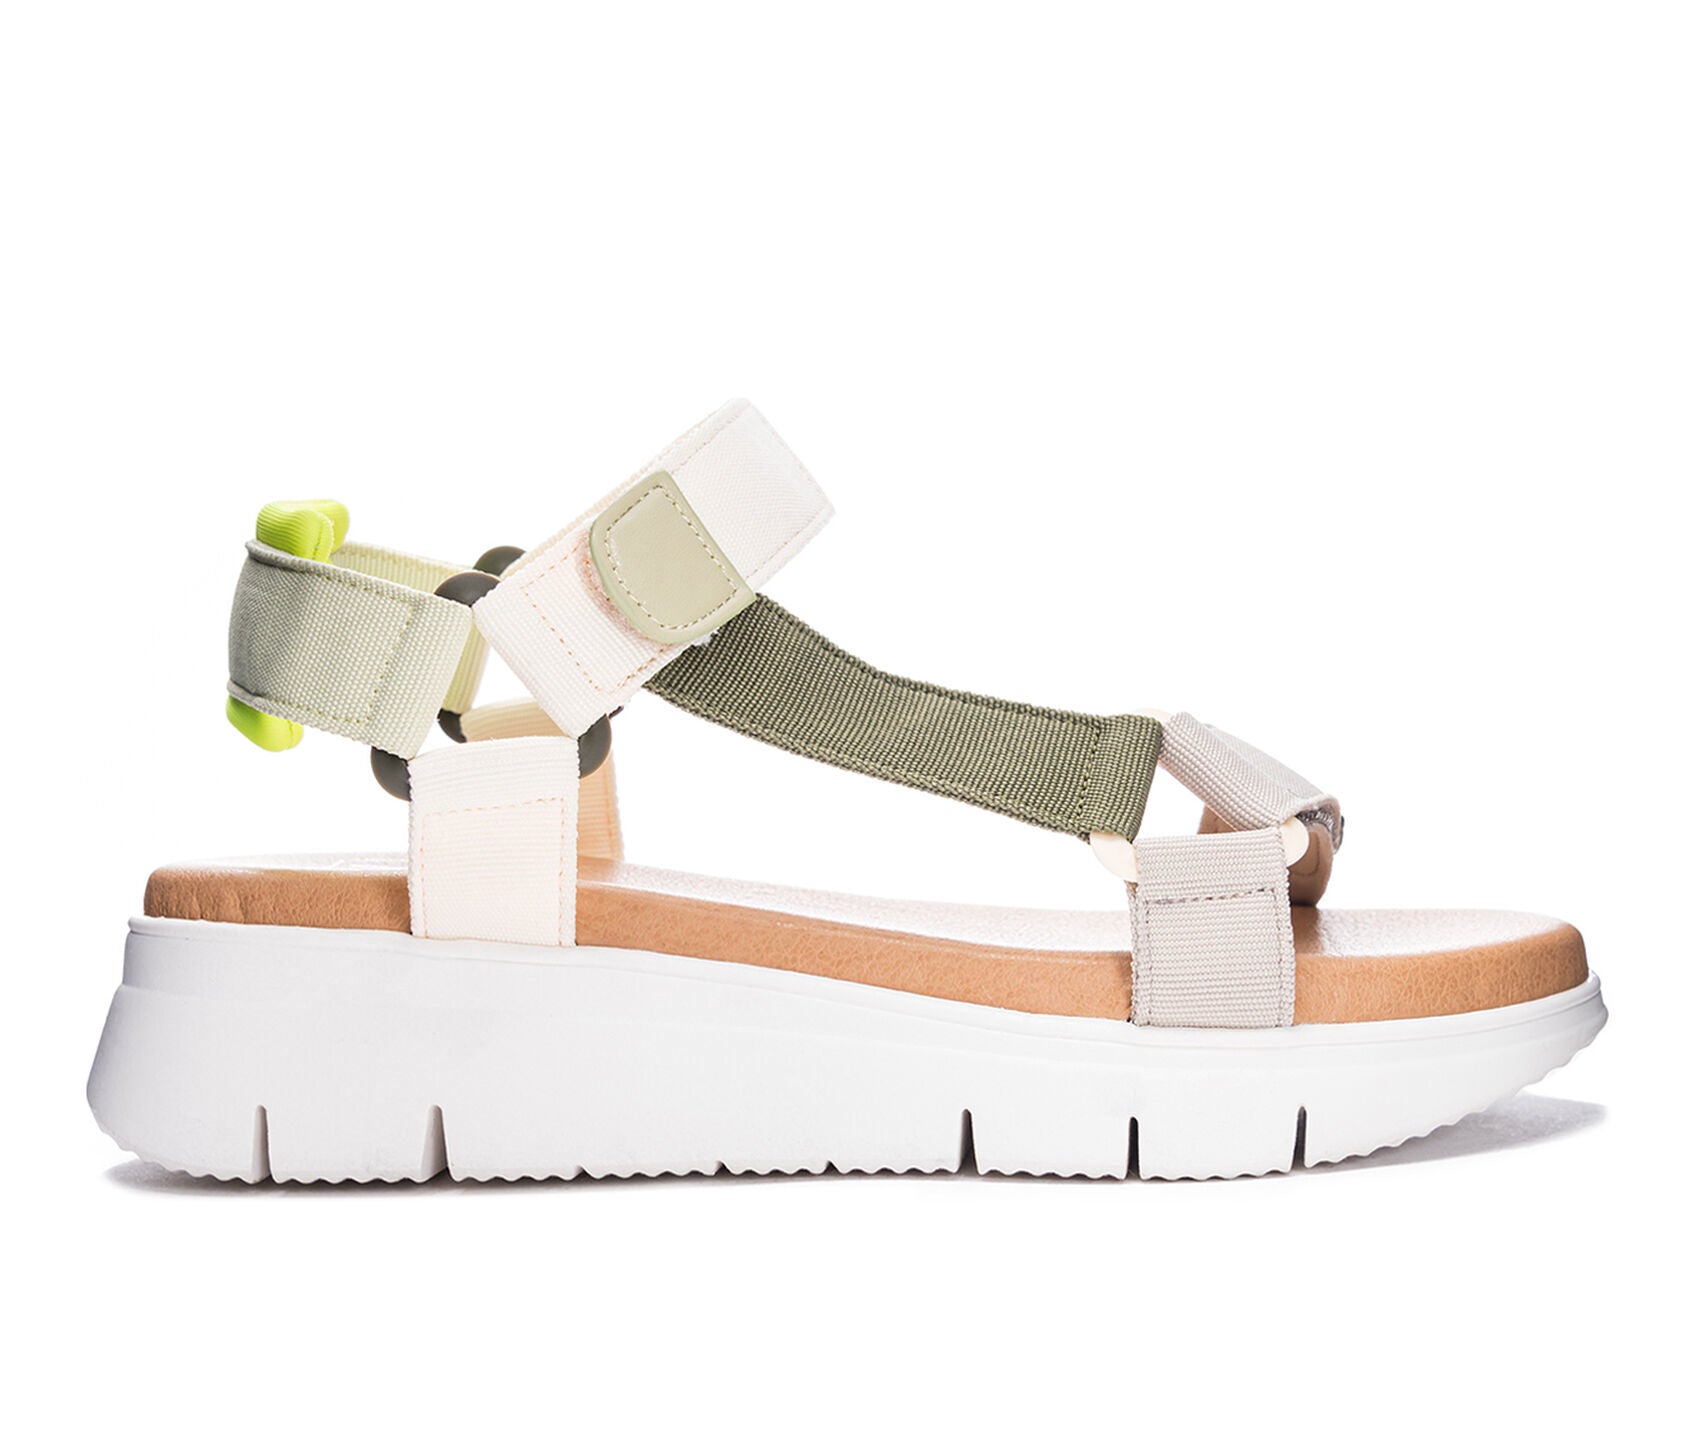 The Quest Sandals・Green